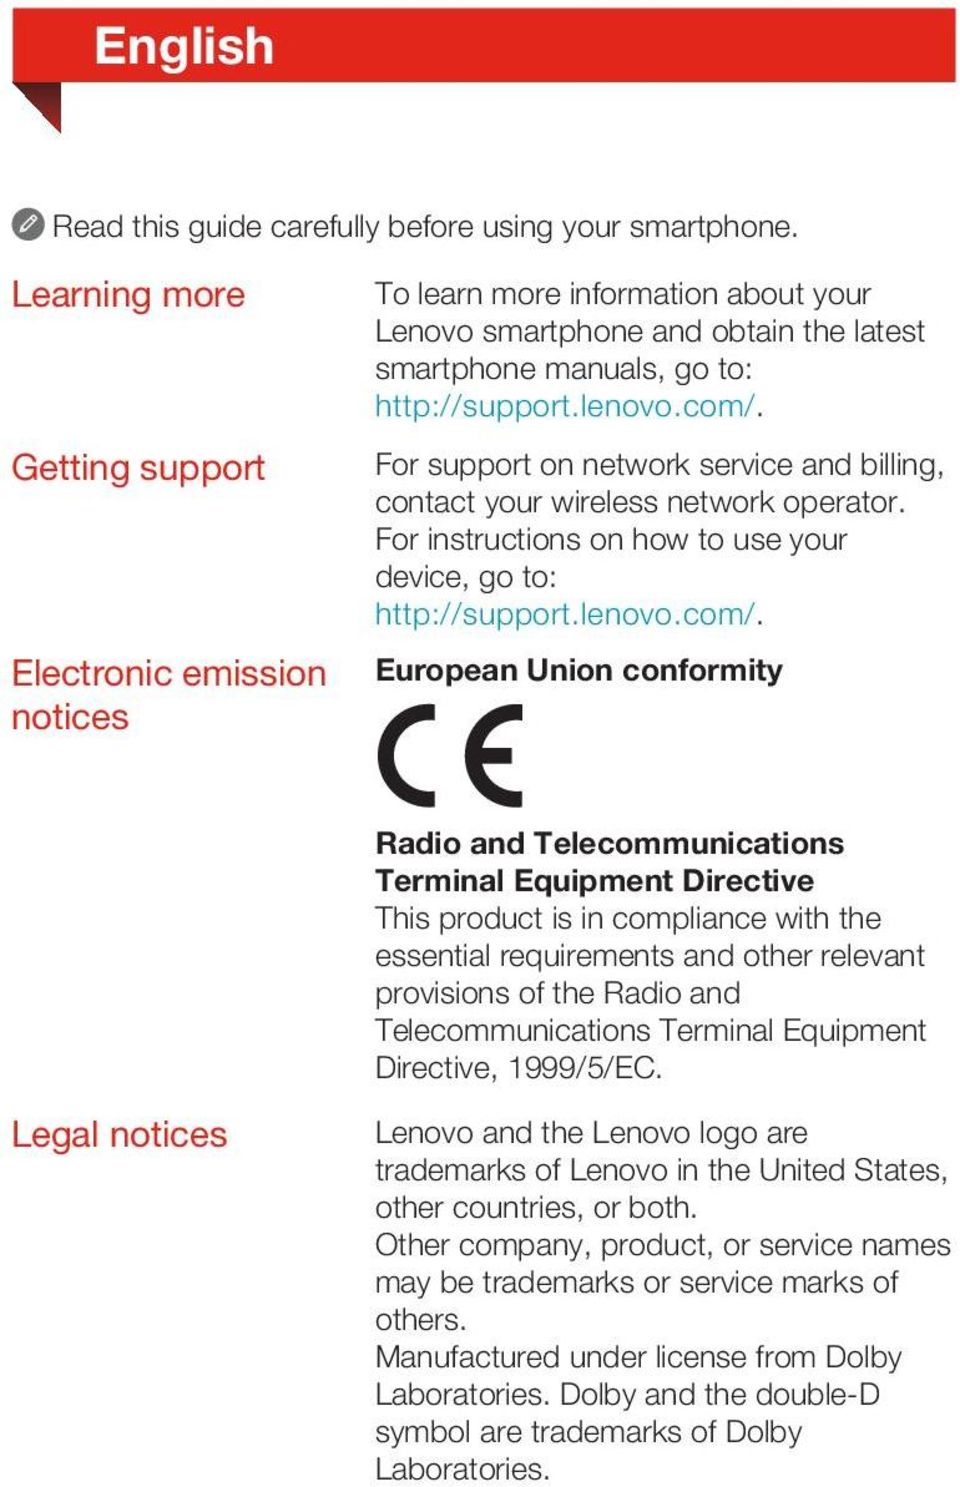 For support on network service and billing, contact your wireless network operator. For instructions on how to use your device, go to: http://support.lenovo.com/.